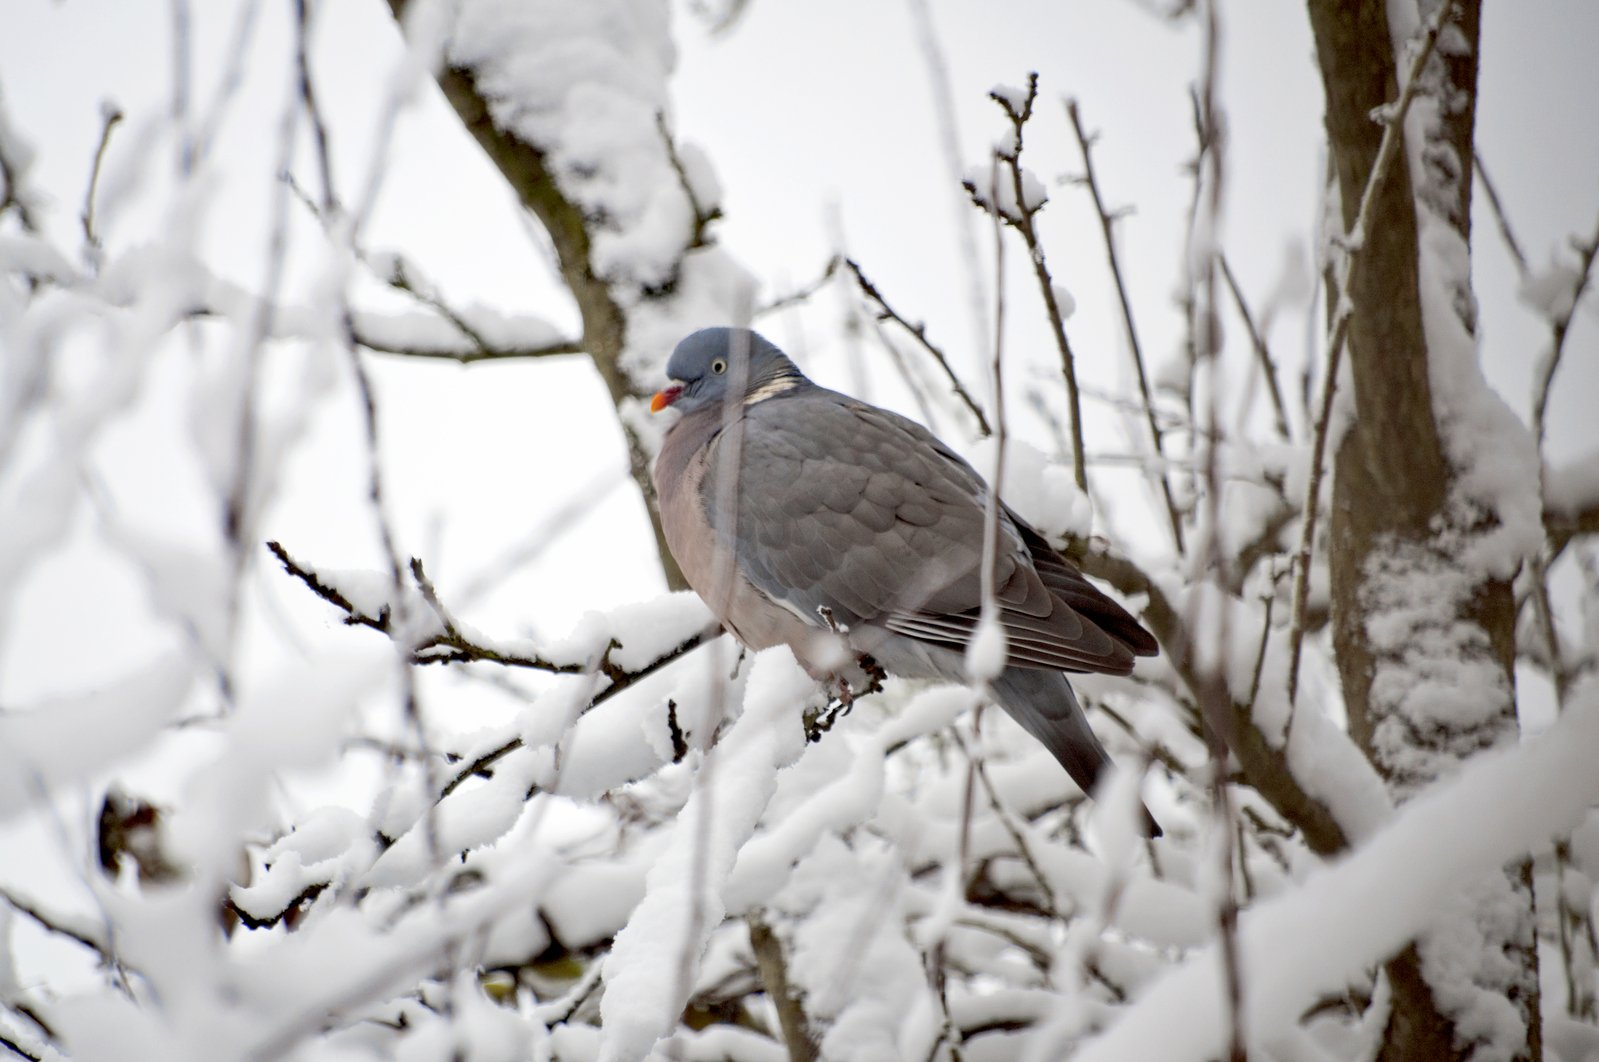 a gray pigeon perched on a nch in the snow